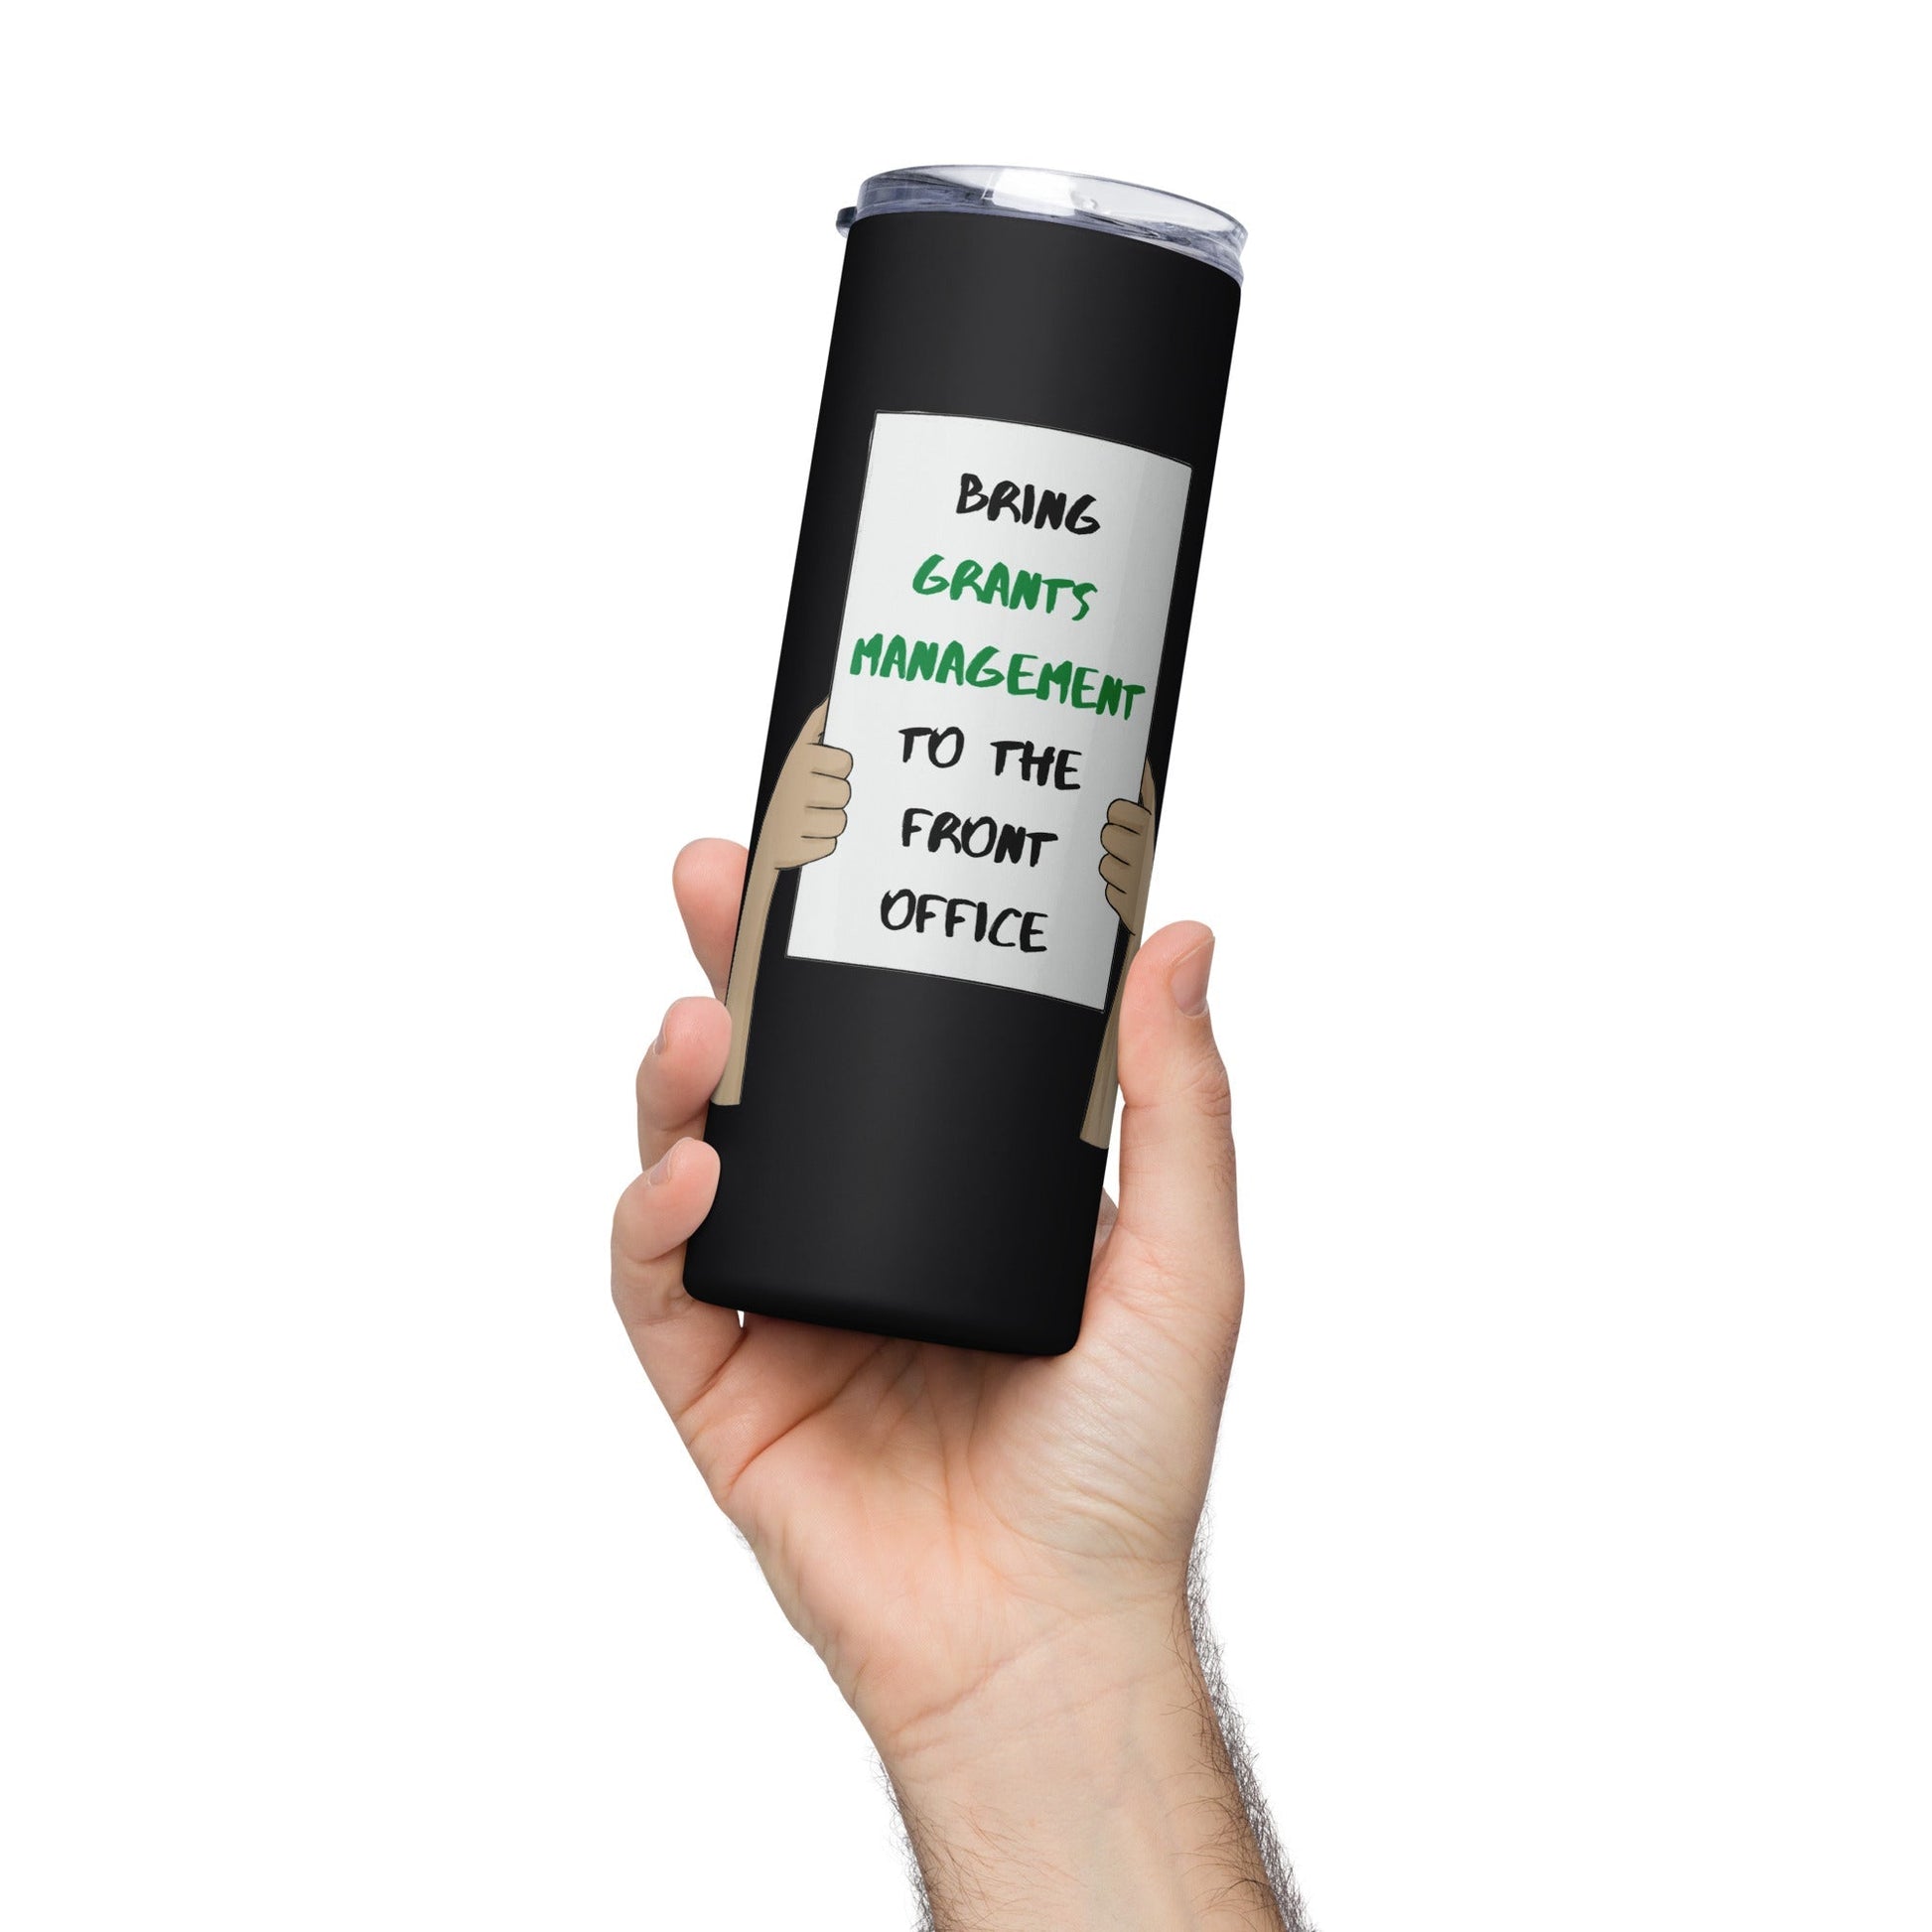 Bring Grants Management to the Front Office Protest Stainless steel tumbler